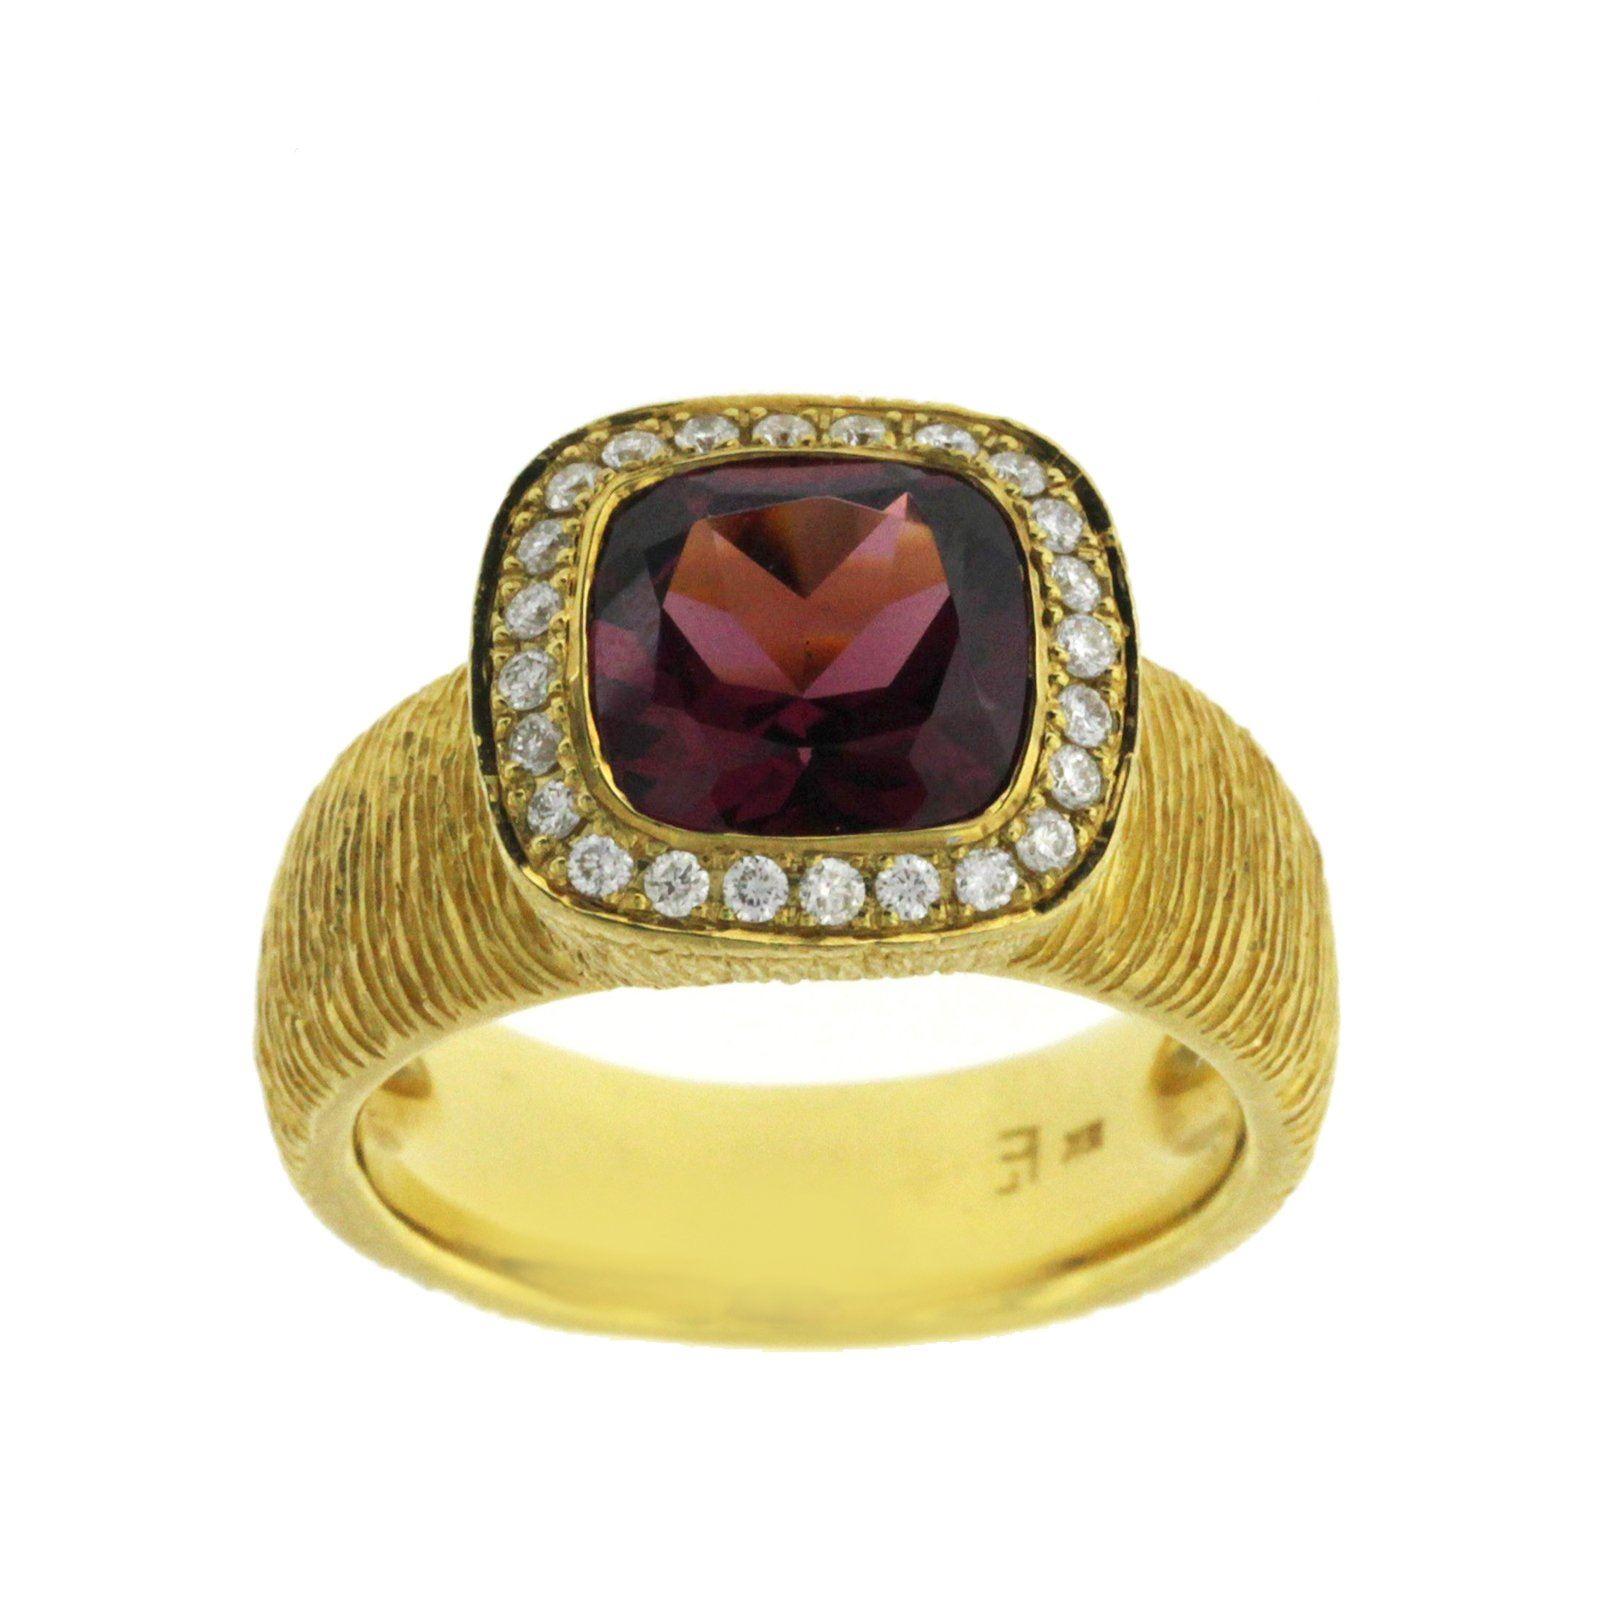 Top: 11.5 mm
Band Width: 6 mm
Metal: 18K Yellow Gold 
Size: 5-7 ( Please message Us for your Size )
Hallmarks: 750
Total Weight: 11.4 Grams
Stone Type: 2.25 CT Natural Pink Tourmaline & 0.26 CT G SI1 Diamonds
Condition: Pre Owned
Estimated Retail